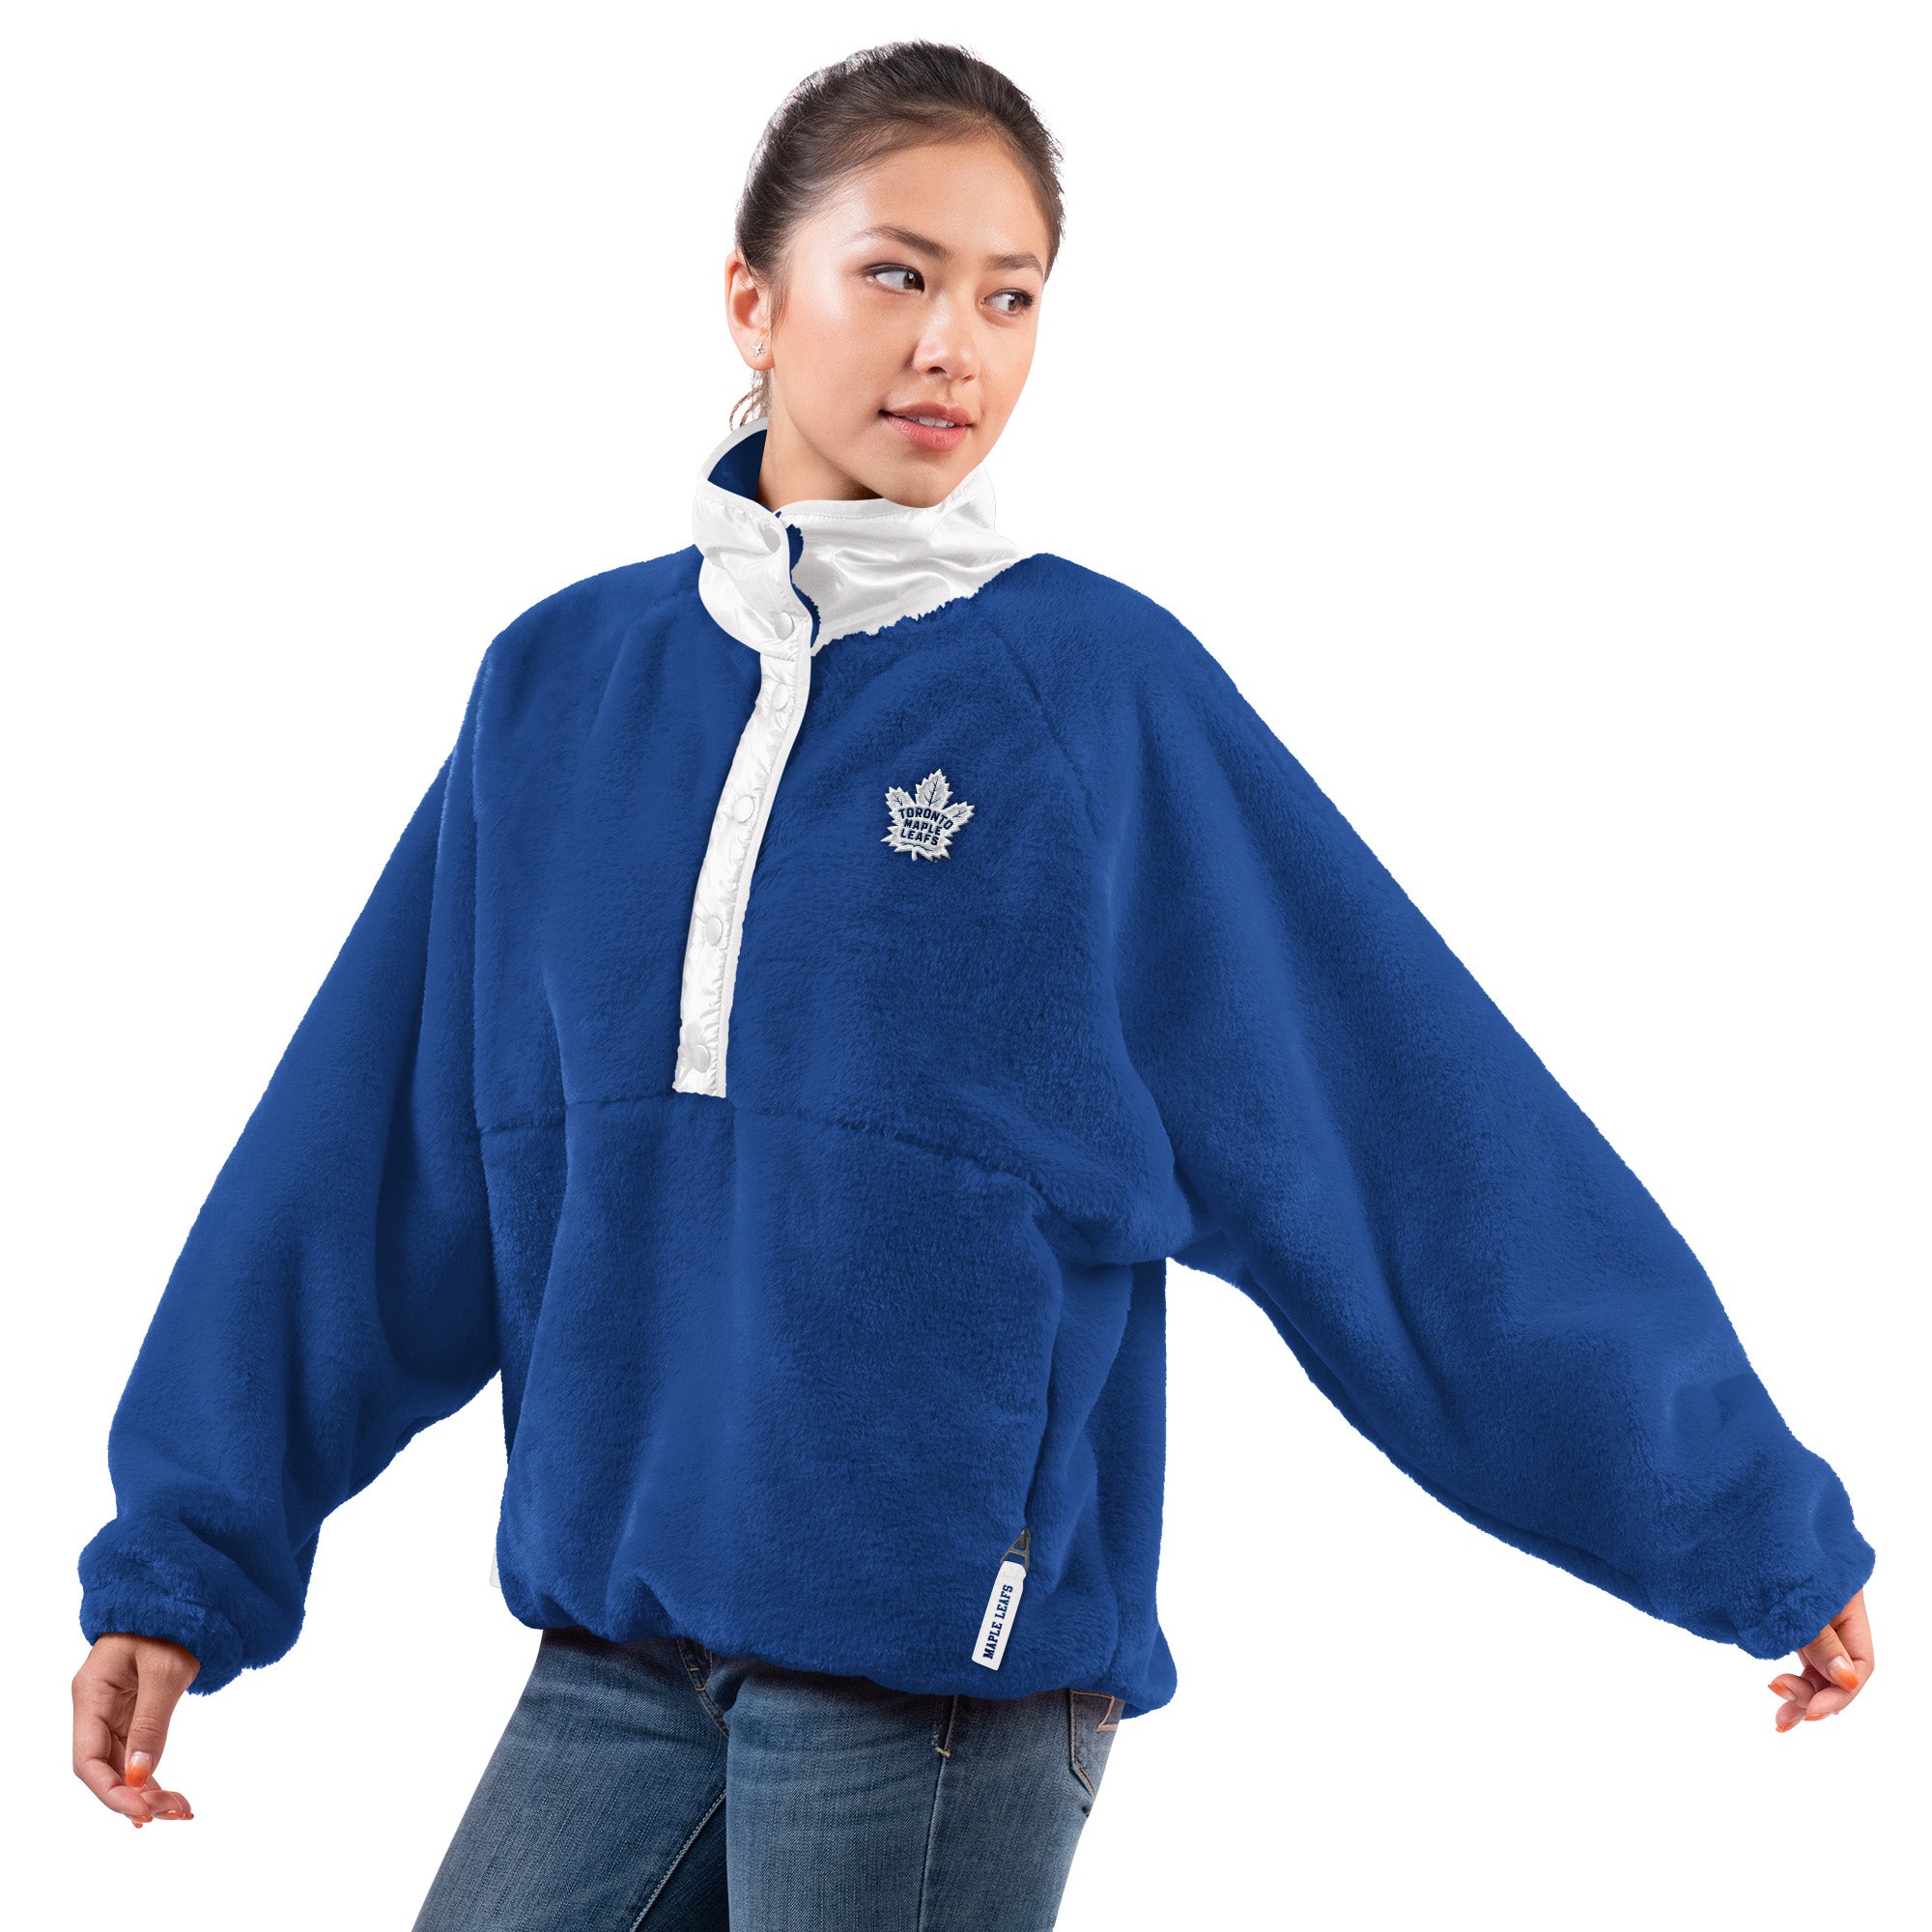 The Toronto Maple Leafs Store Powered by Real Sports Apparel 